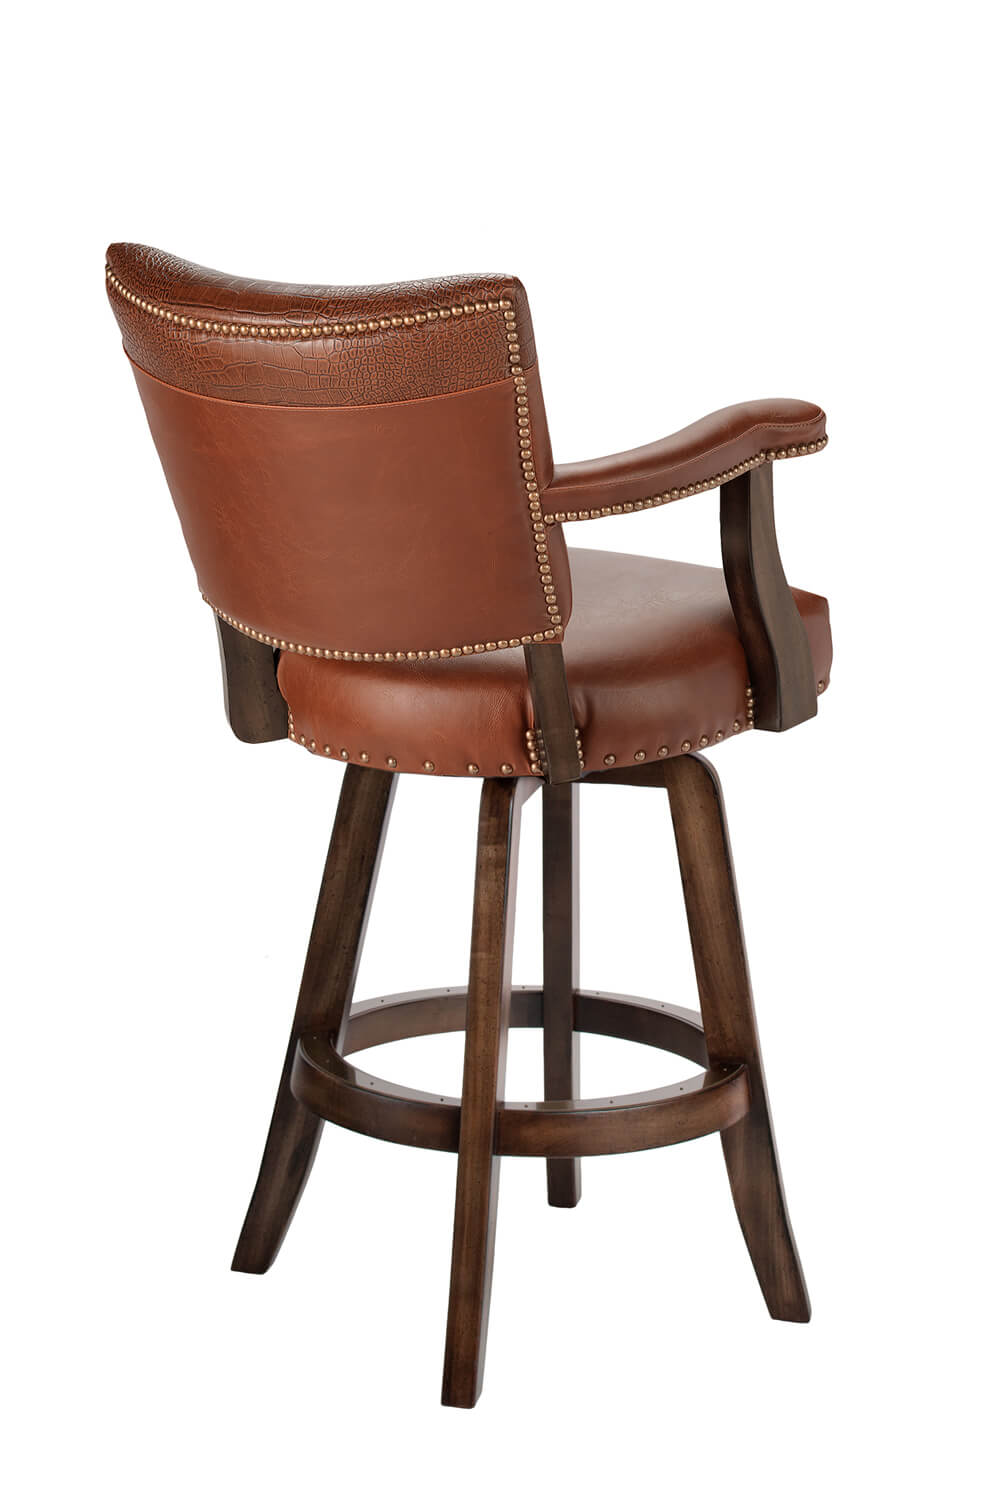 Darafeev's El Dorado Wood Swivel Bar Stool with Arms and Flared Legs - Back View